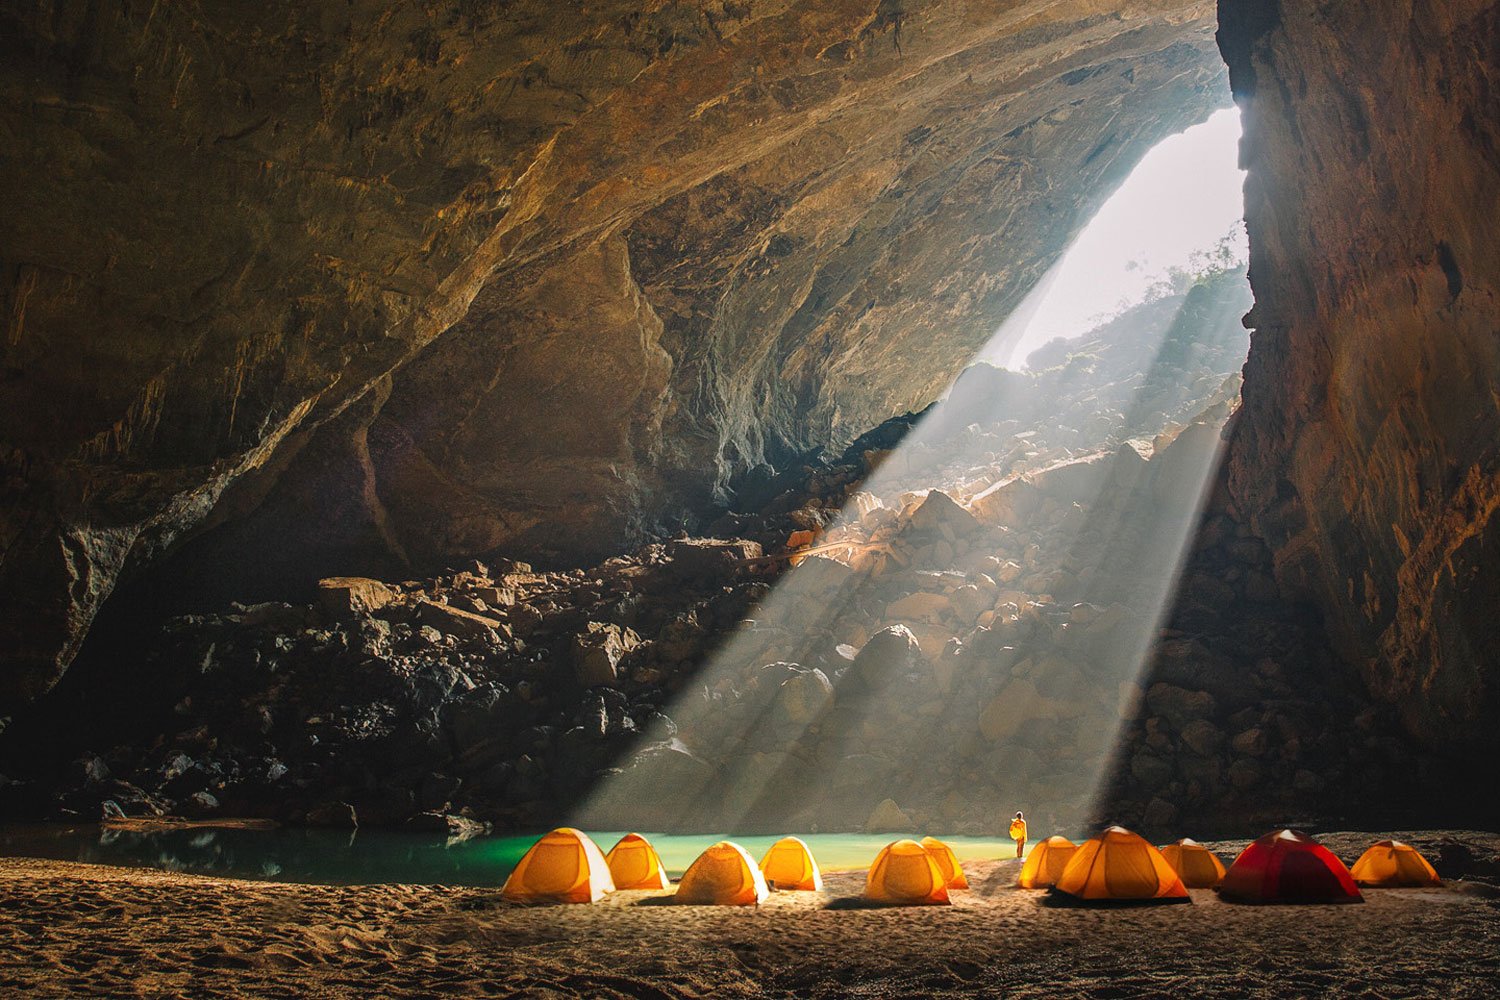 The campsite in Hang En Cave is a magical place, where sunlight streams.